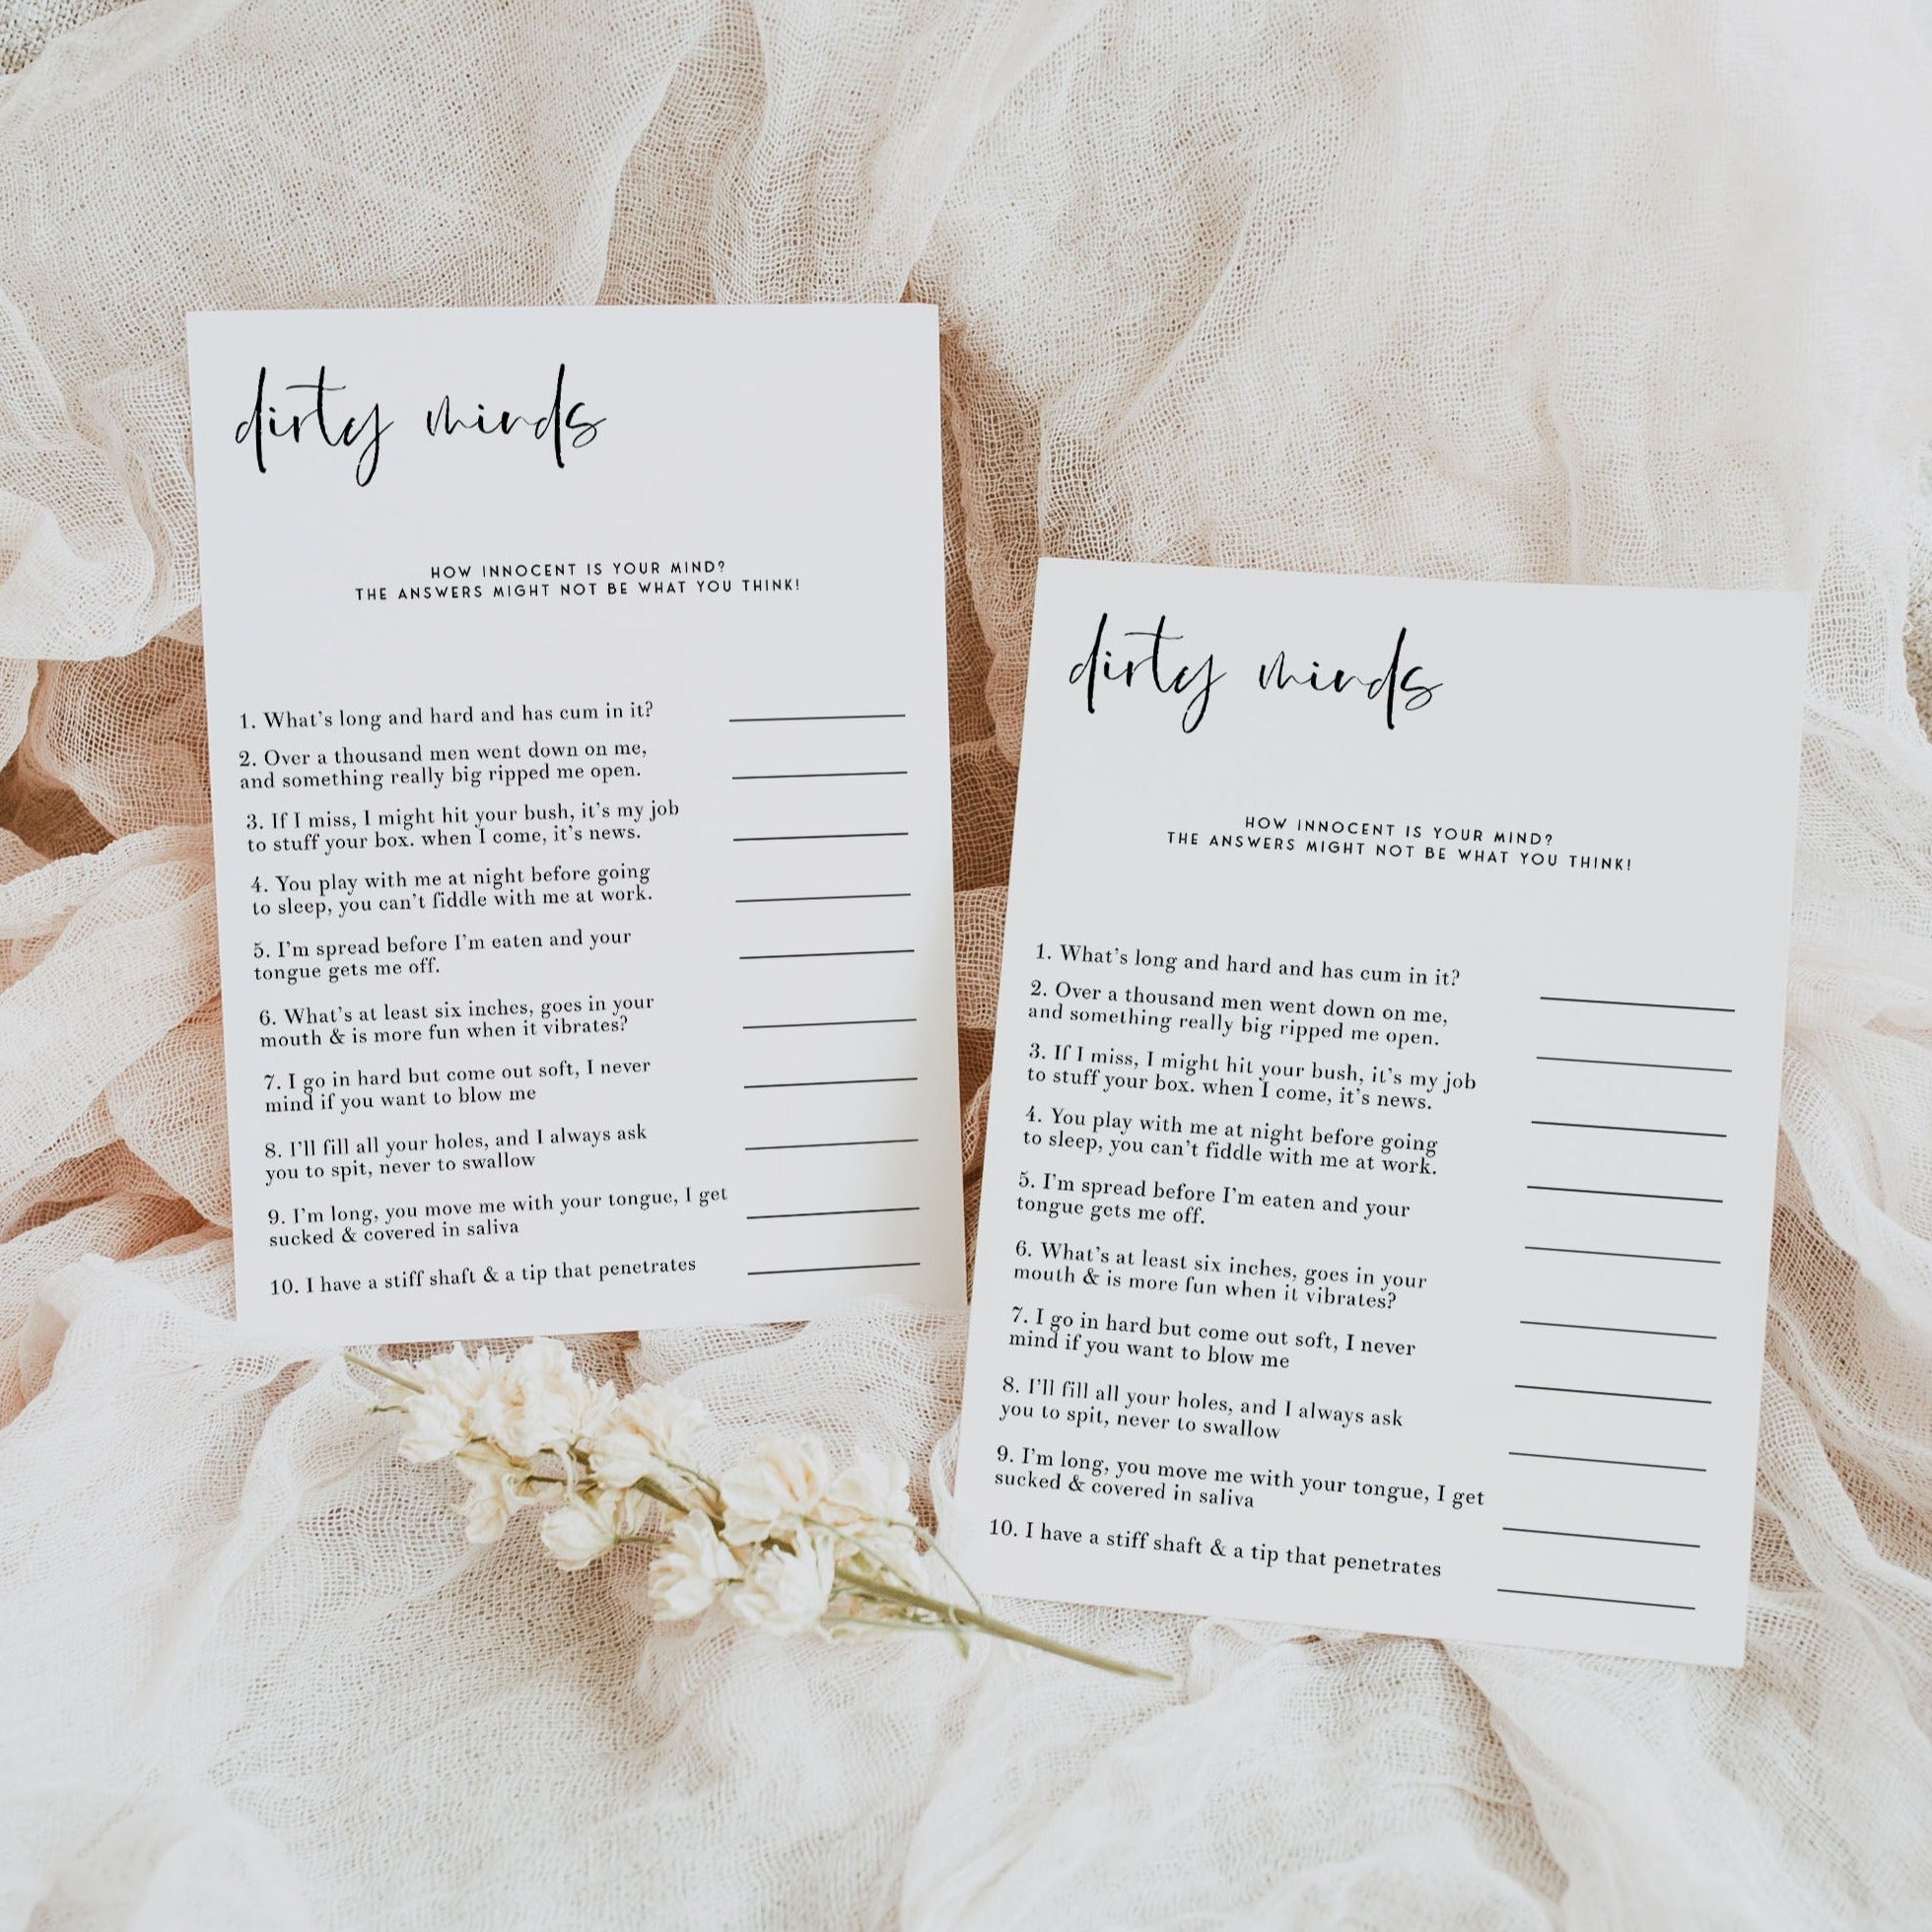 Fully editable and printable bridal shower dirty minds game with a modern minimalist design. Perfect for a modern simple bridal shower themed party